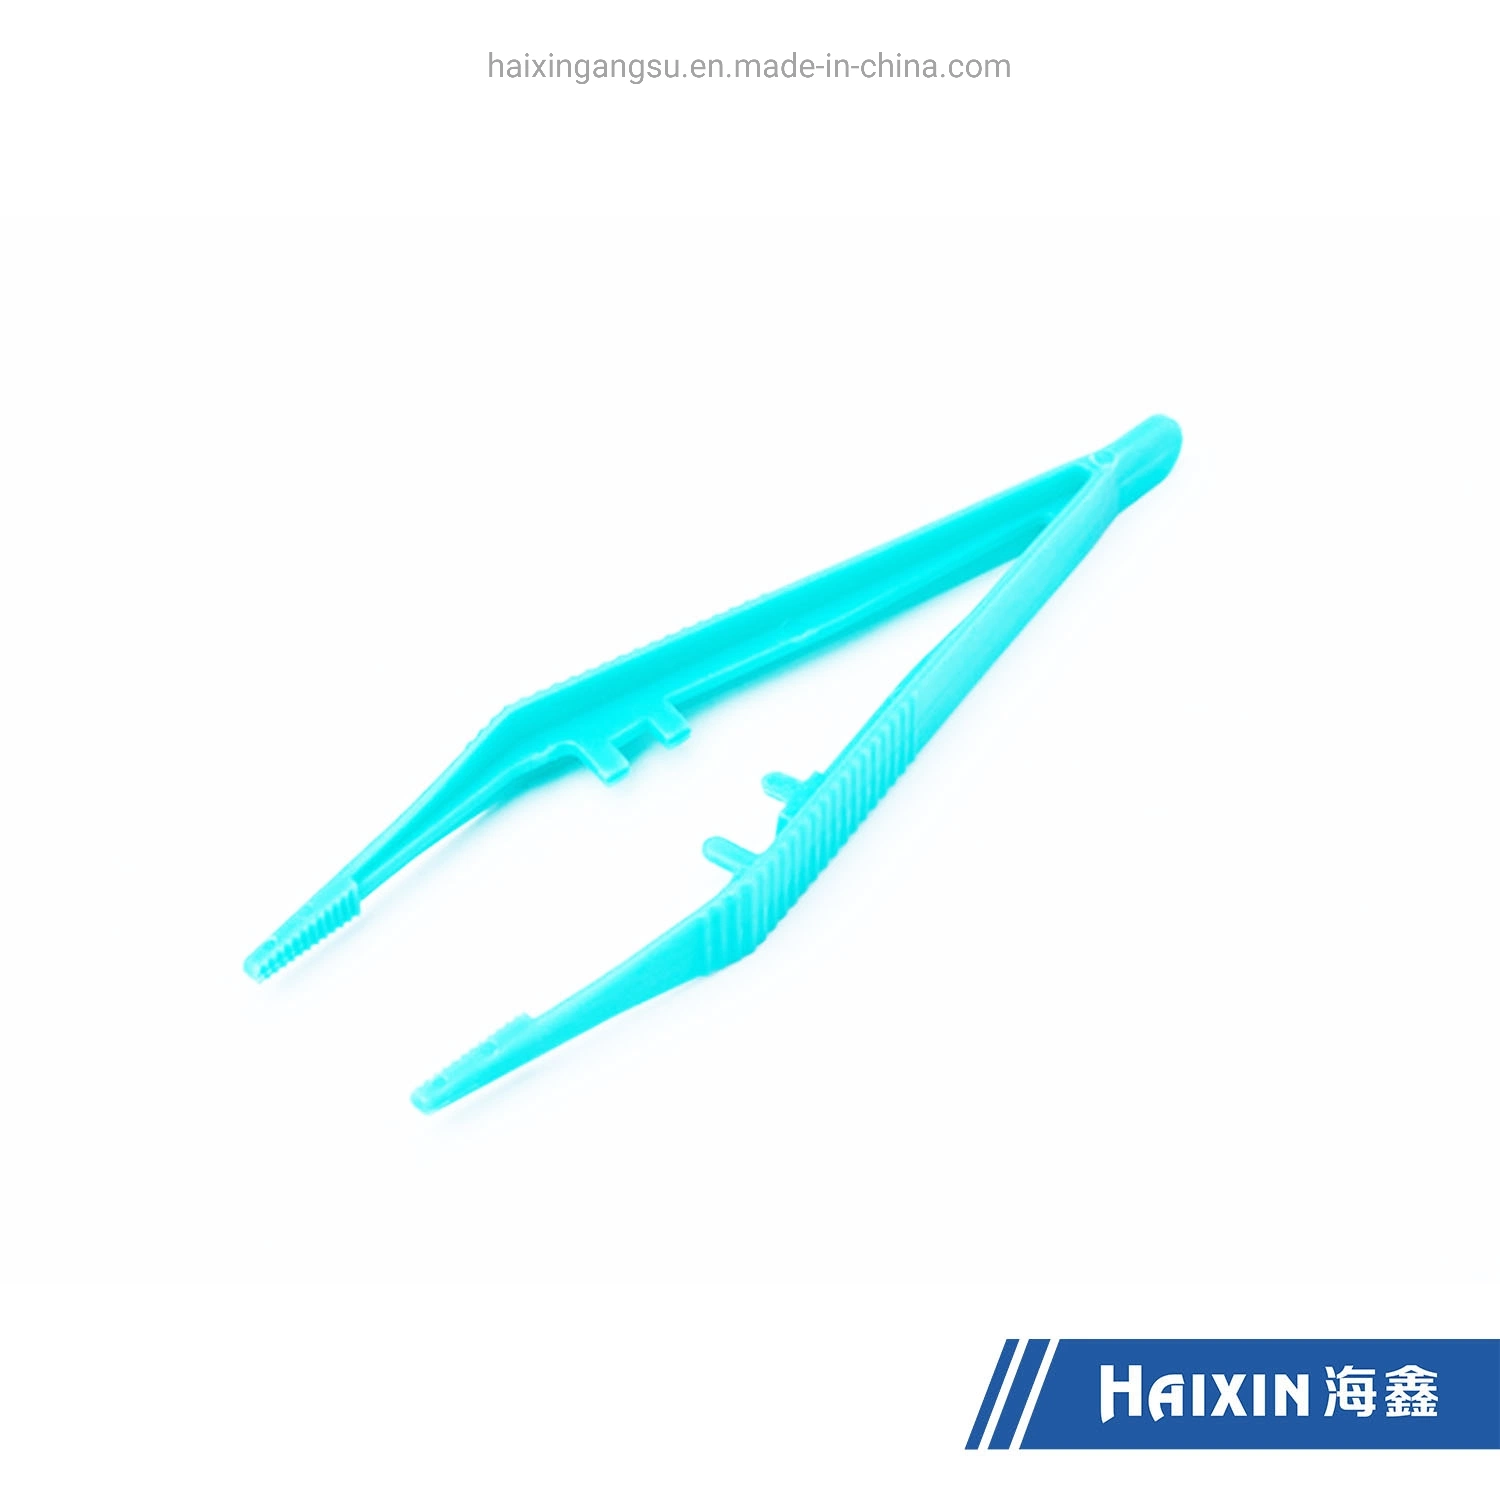 ABS Custom Made Plastic Product Medical Disposable Emergency Forceps